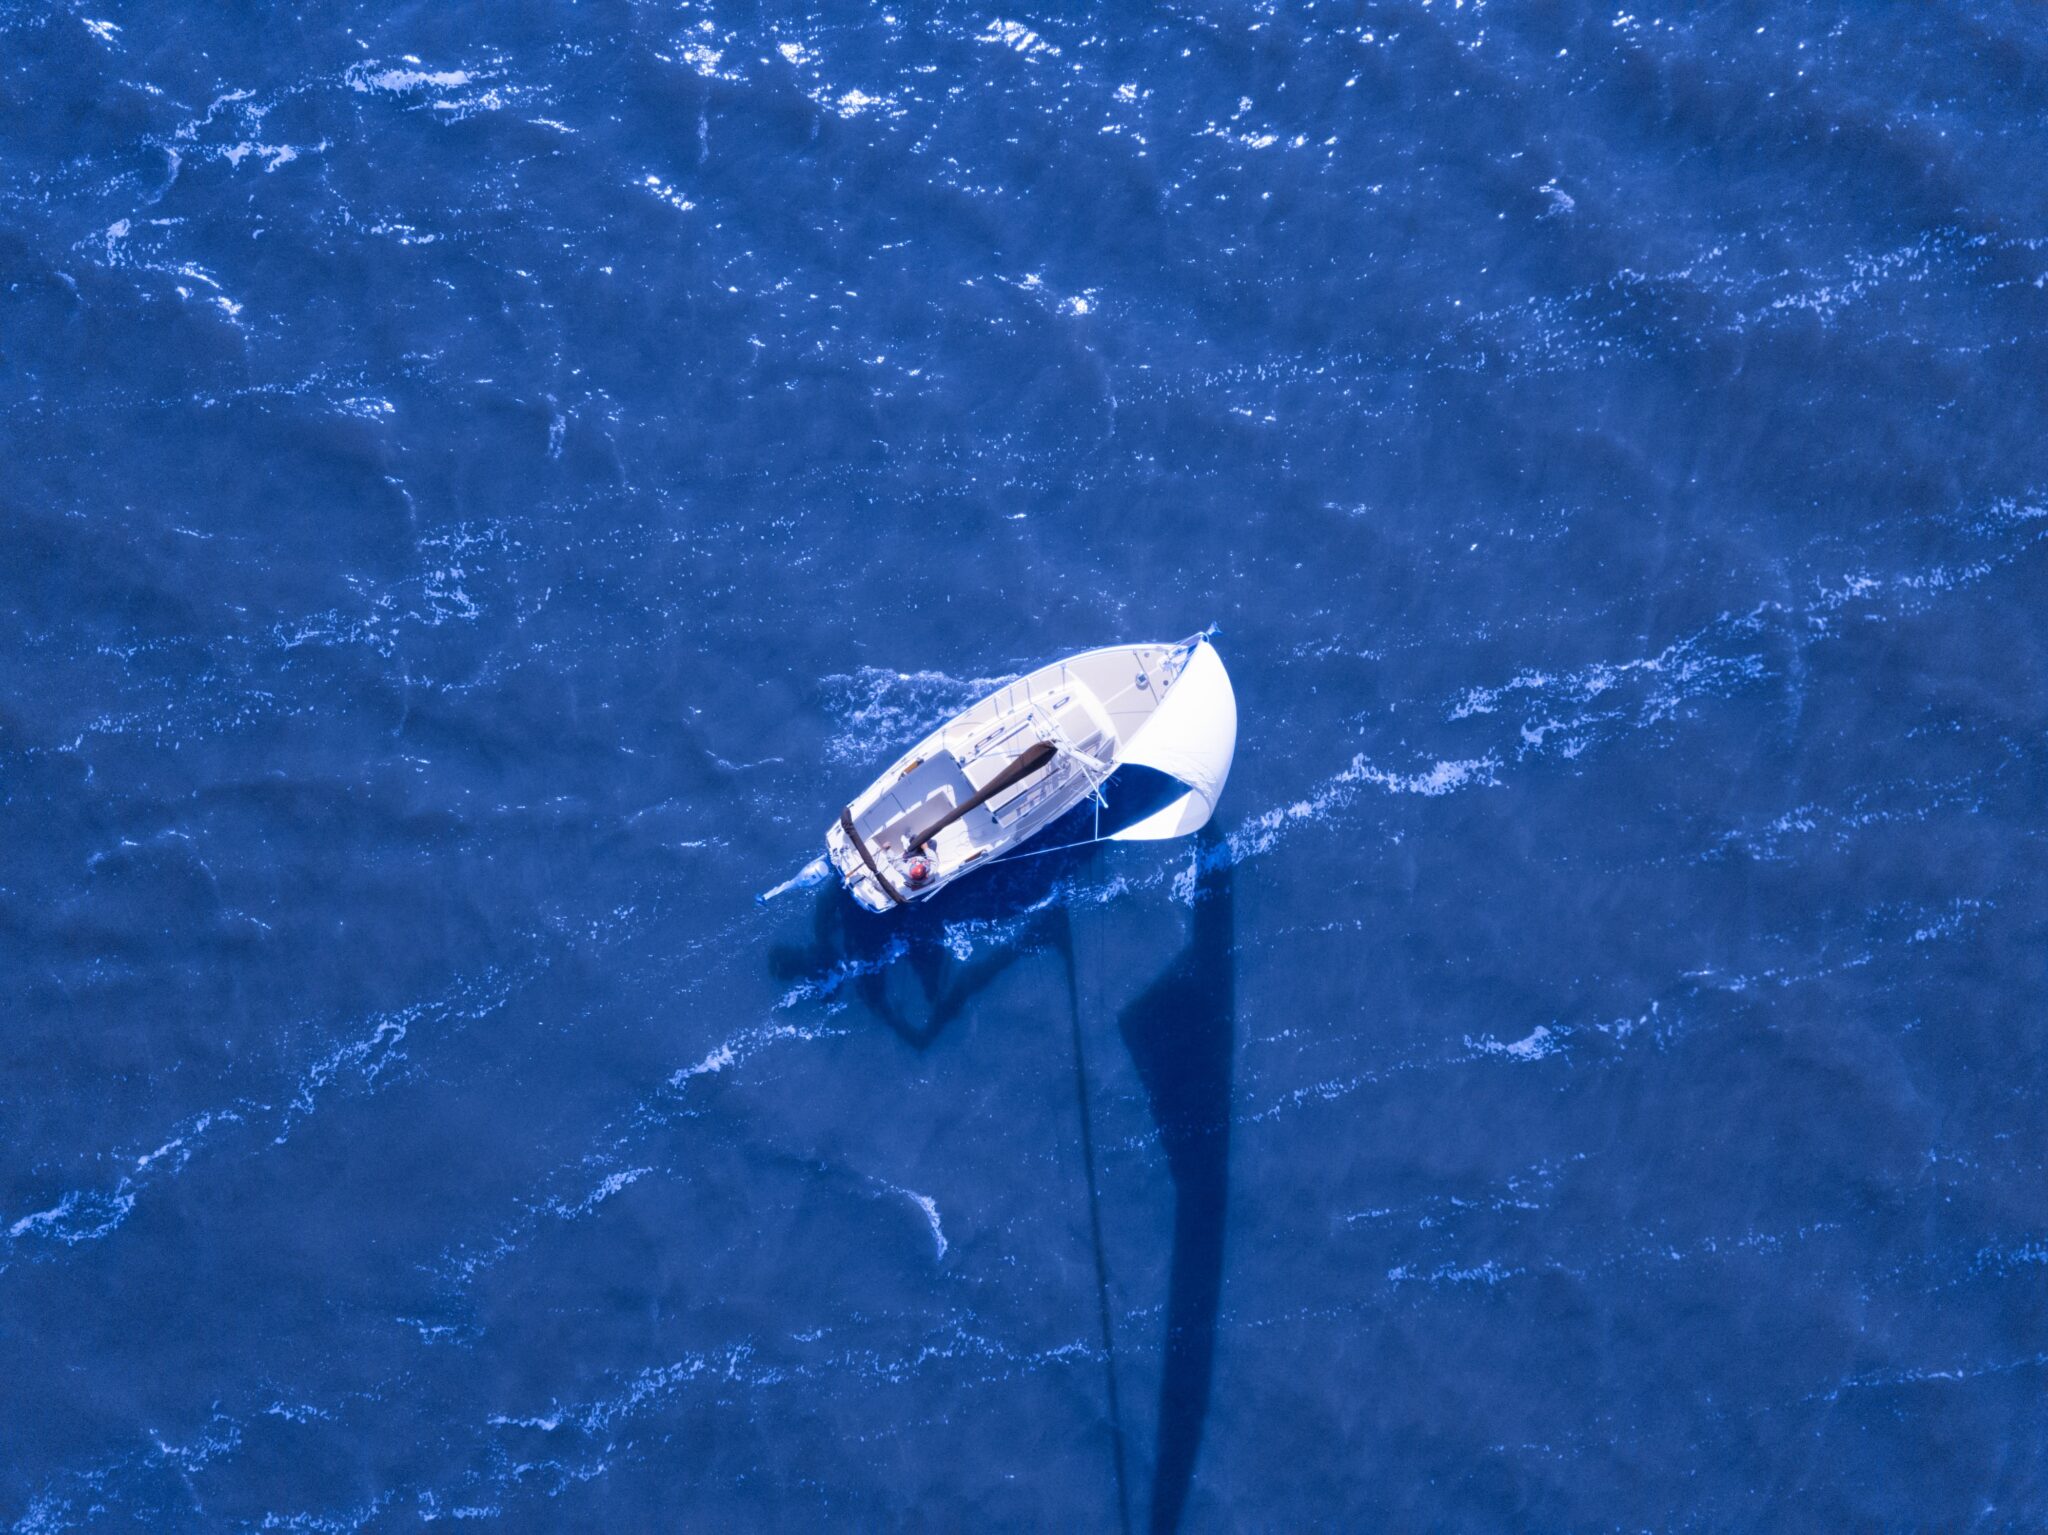 Monohull sailboat in deep blue water from overhead